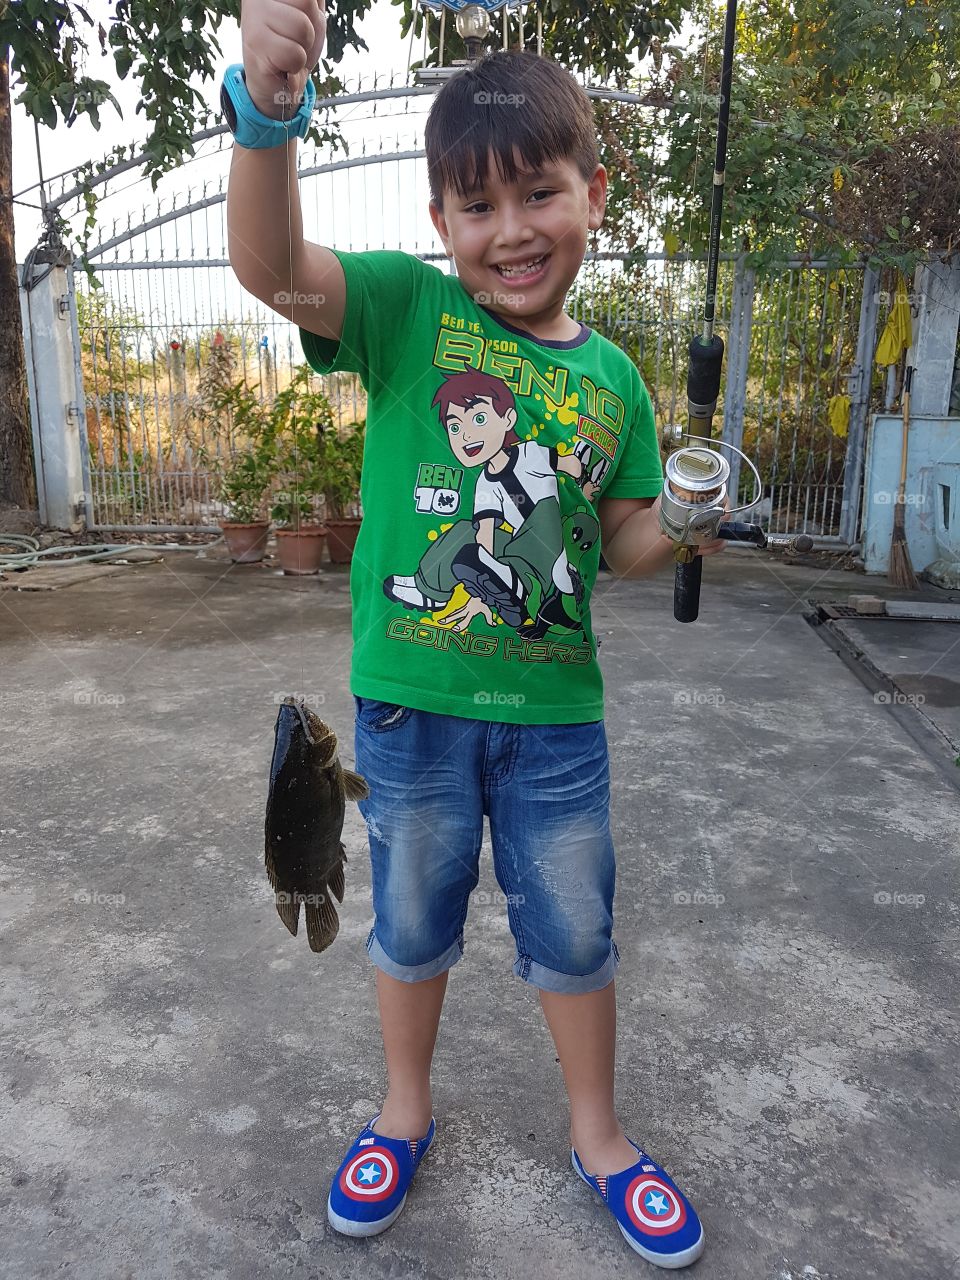 young boy proudly showing off his catch, a fresh river fish